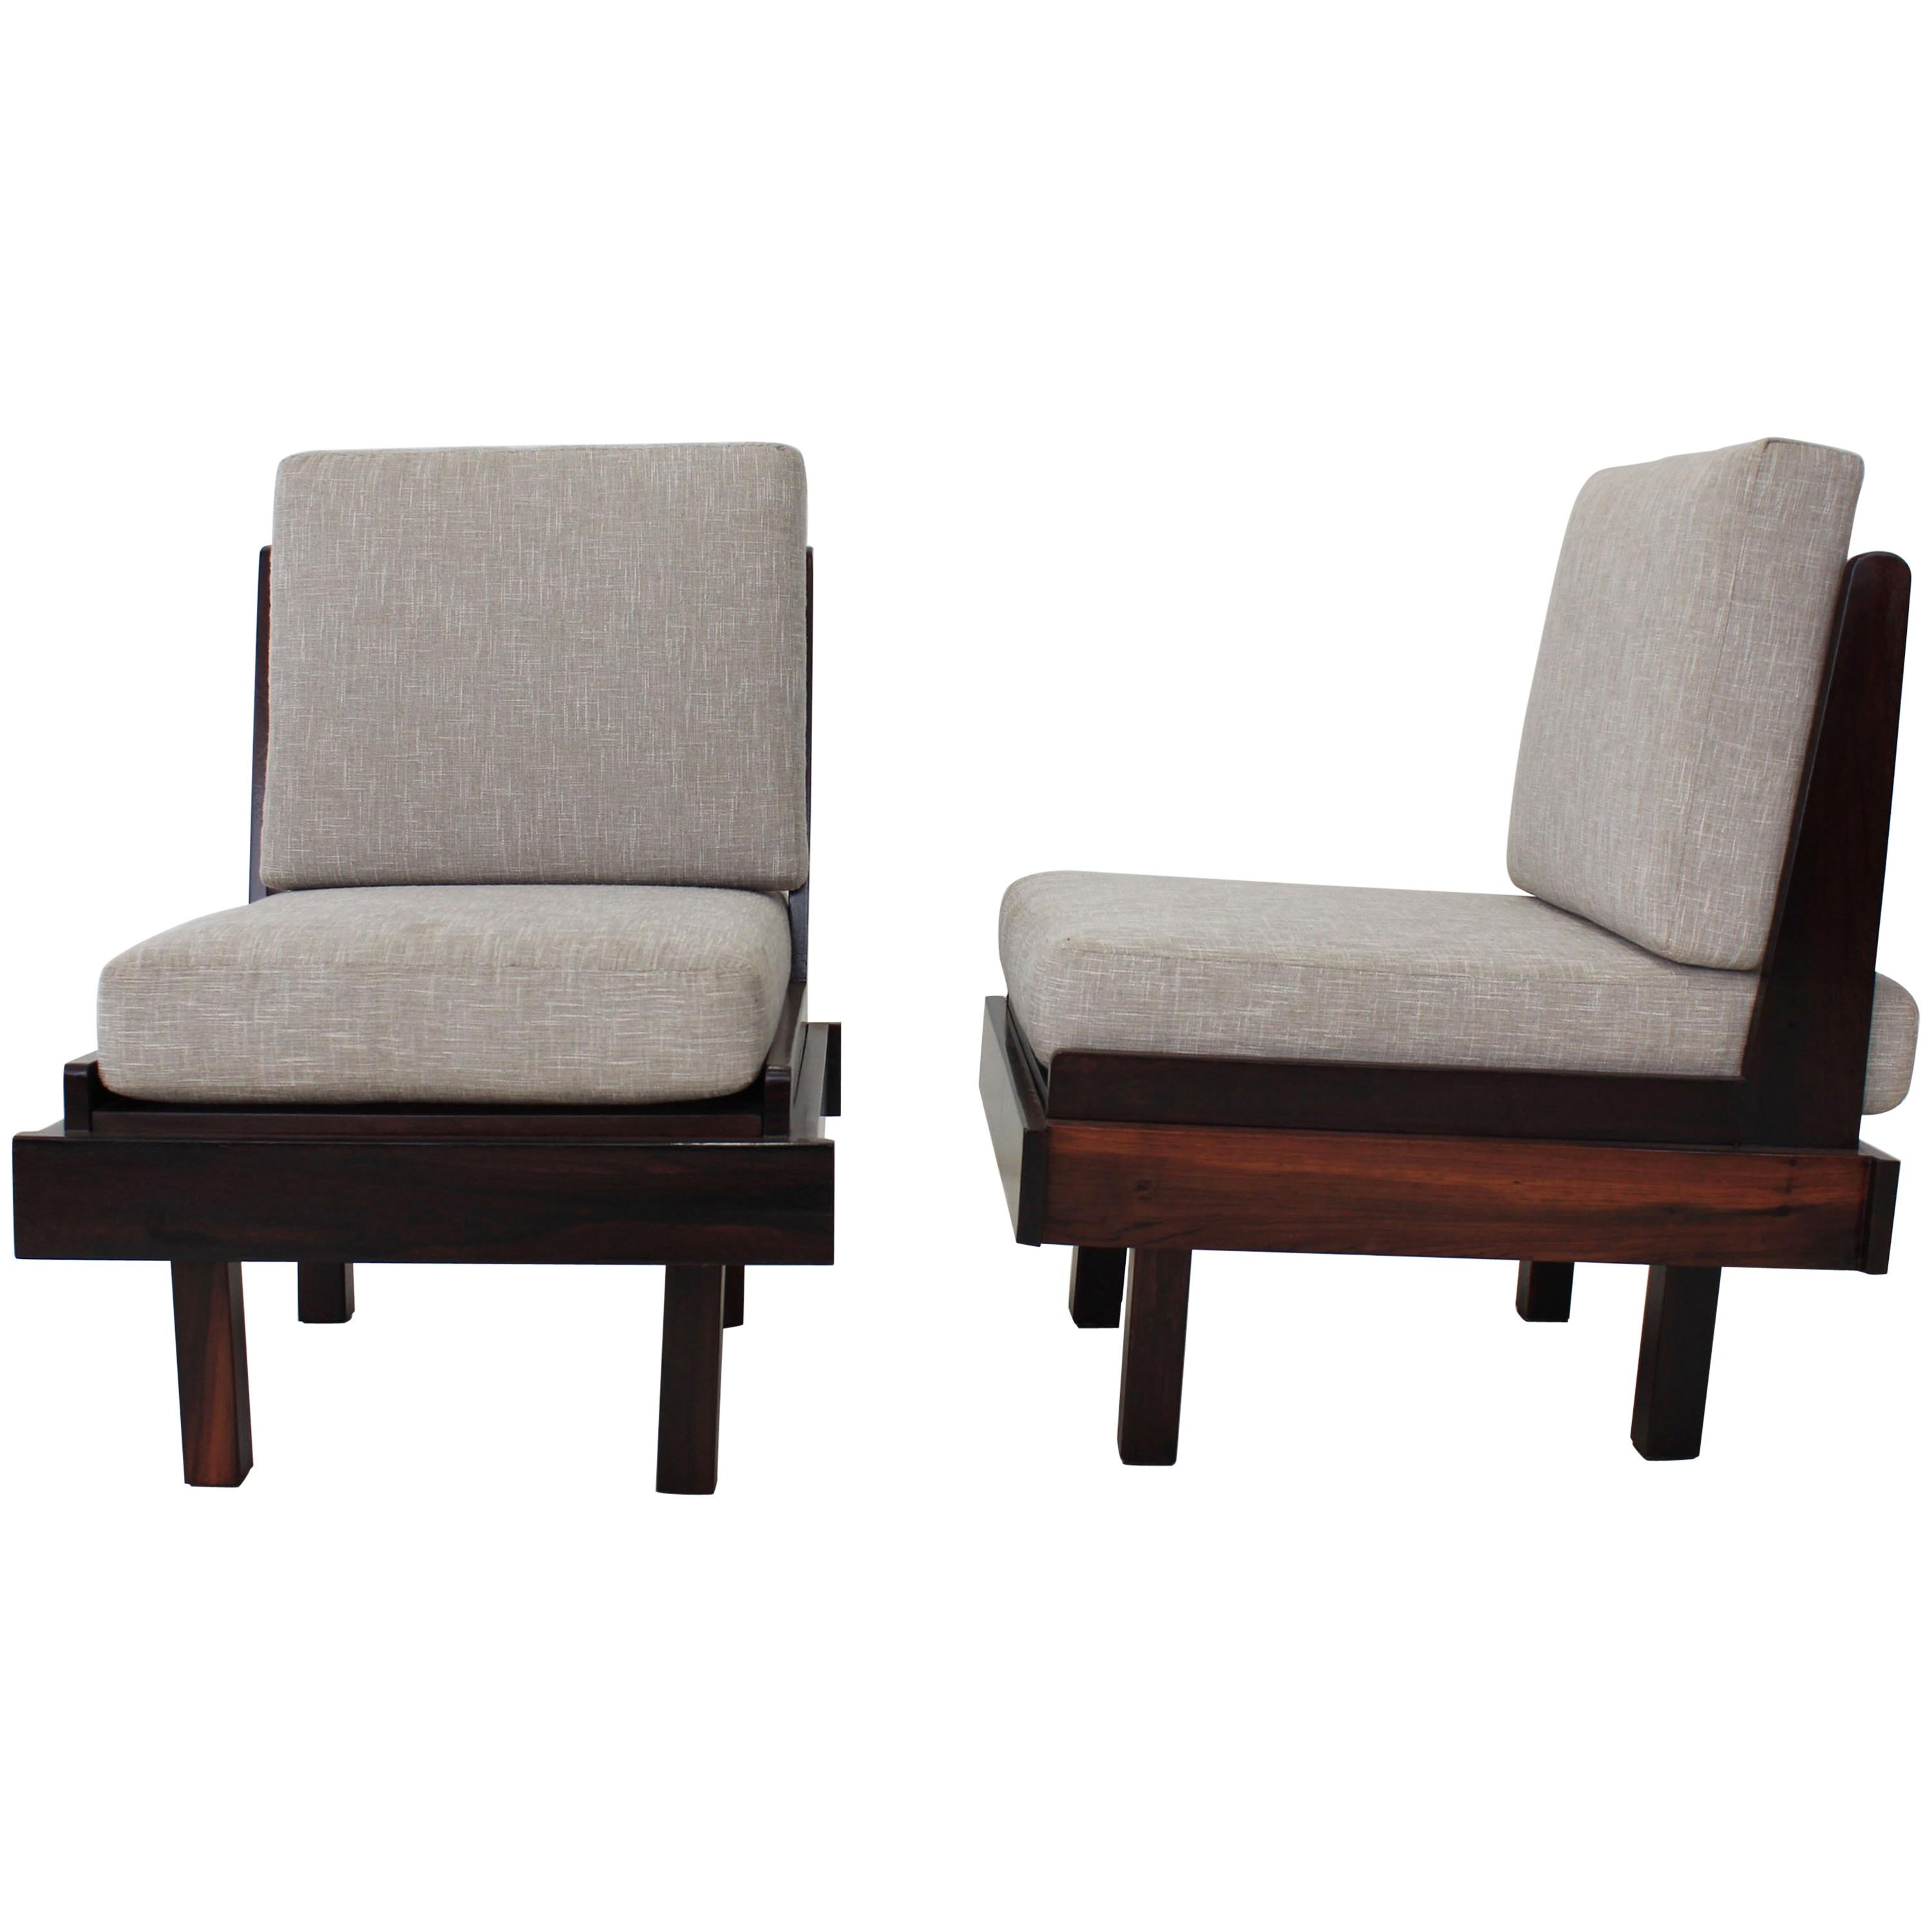 Pair of Brazilian Rosewood Armchair For Sale